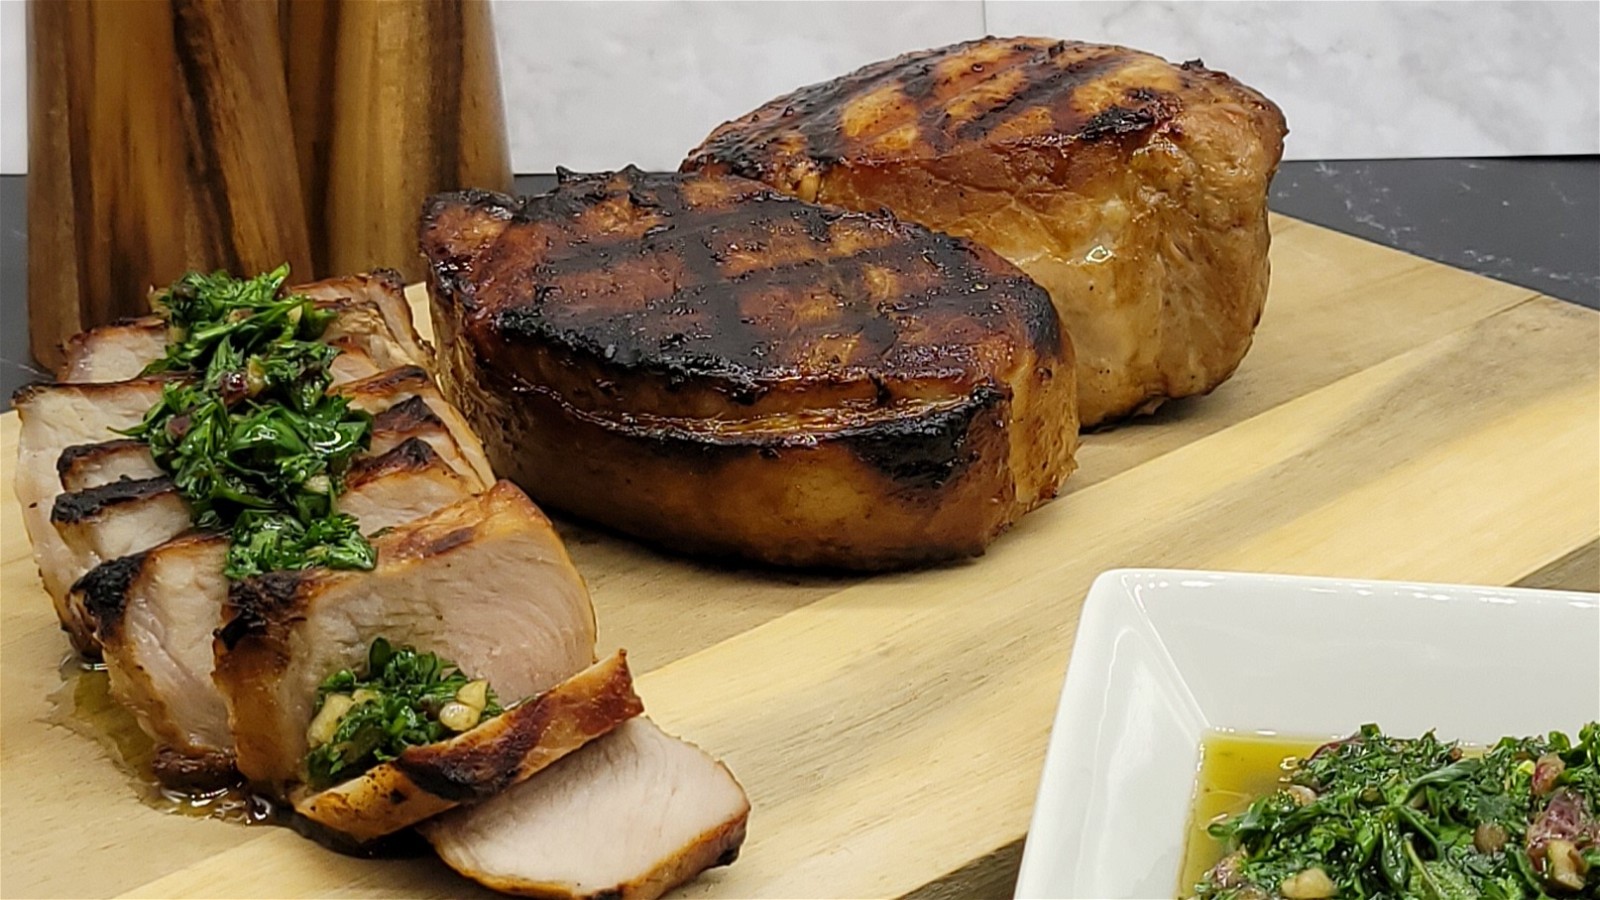 Image of Grilled Pork with Chimichurri Sauce